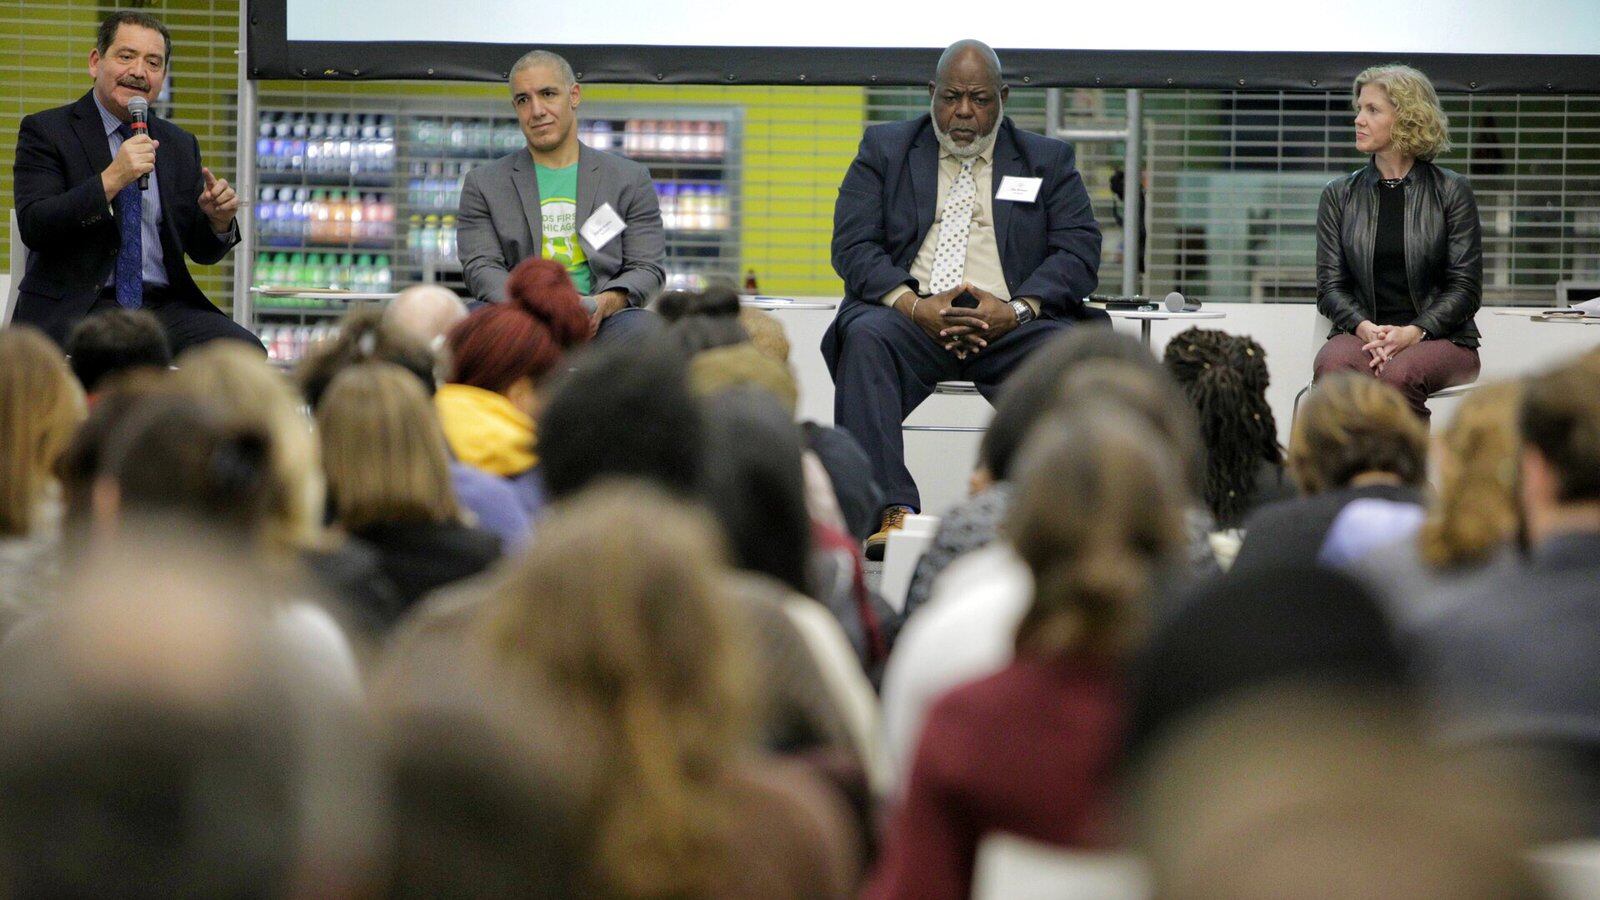 Panelists at a Chalkbeat Chicago forum on the city's next mayor and public schools included, from left, Jesus "Chuy" Garcia, Daniel Anello, Jitu Brown, and Beth Swanson